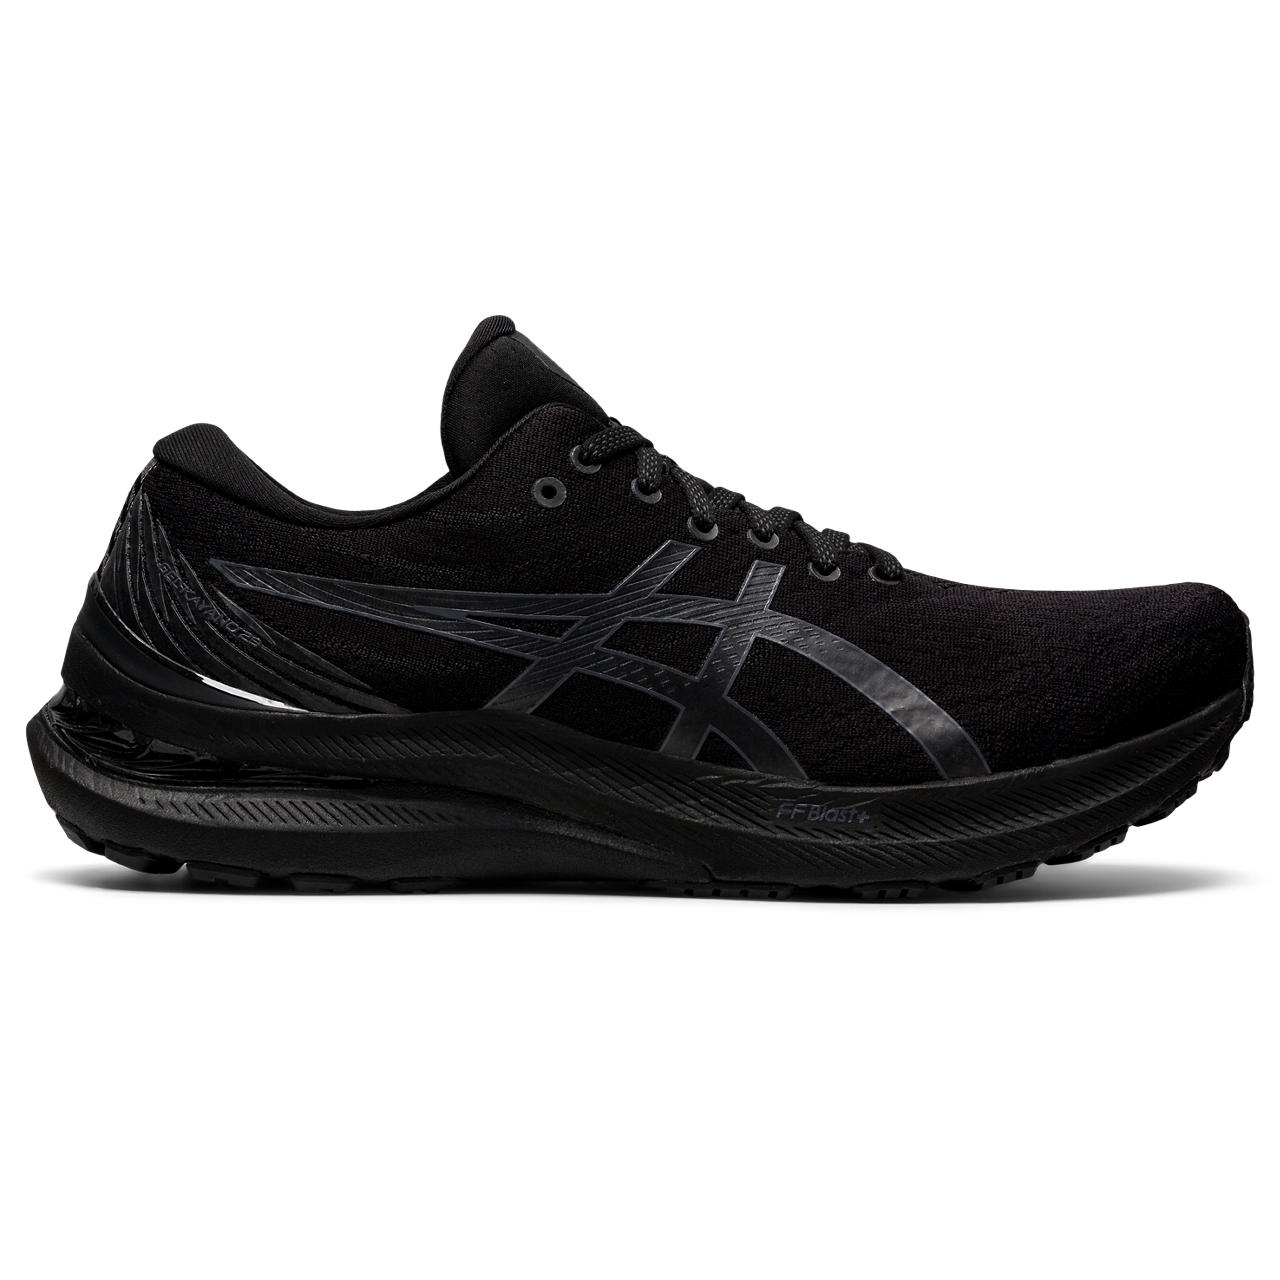 ASICS Running shoes, Men's Fashion, Footwear, Sneakers on Carousell